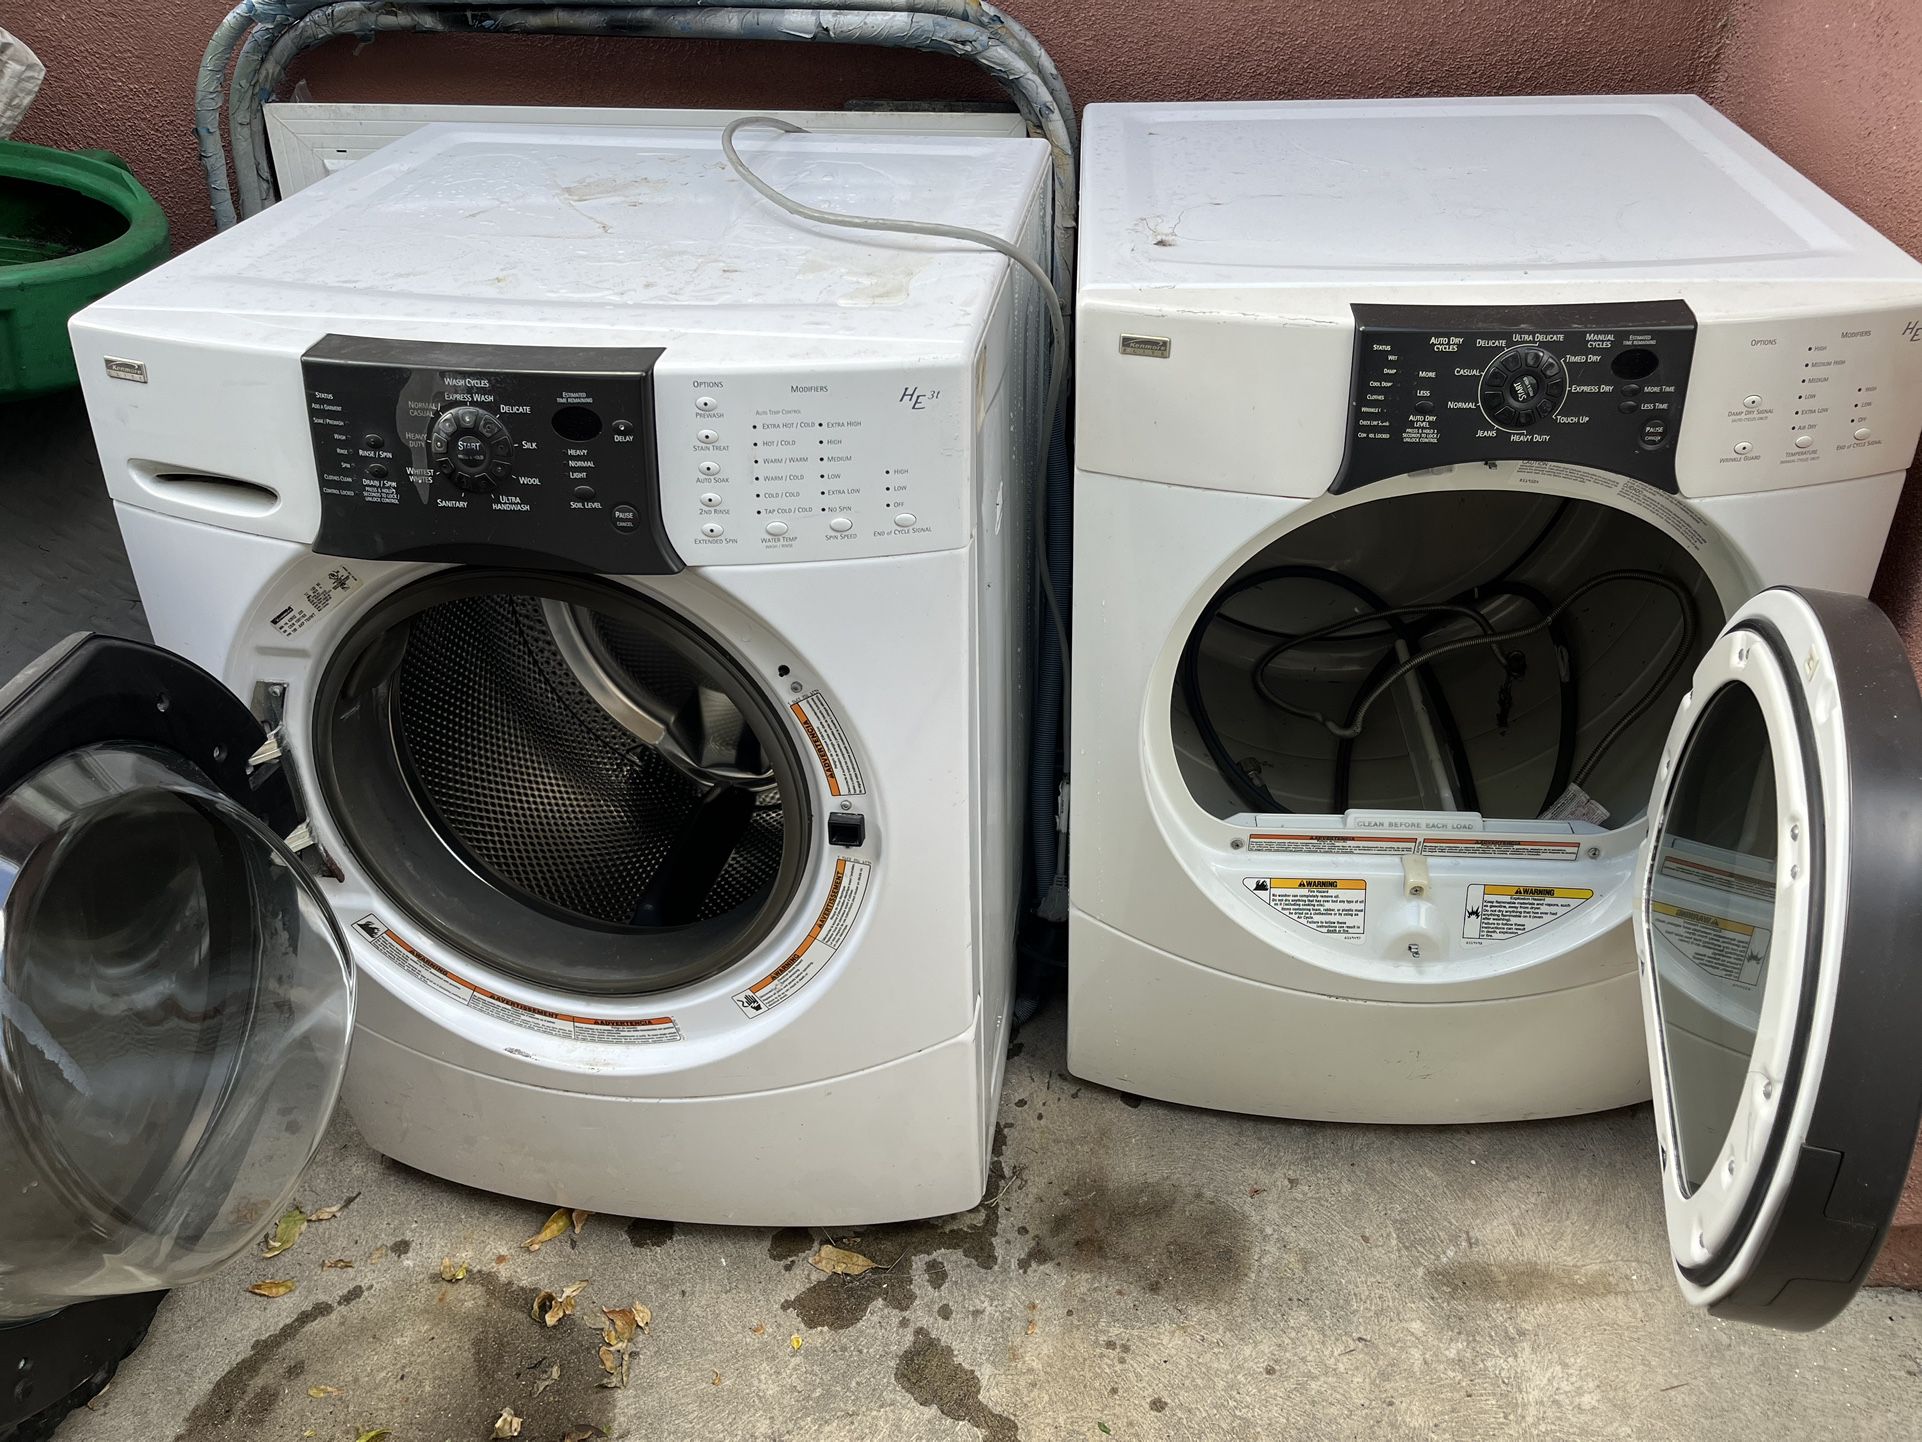 $180 Washer And Dryer